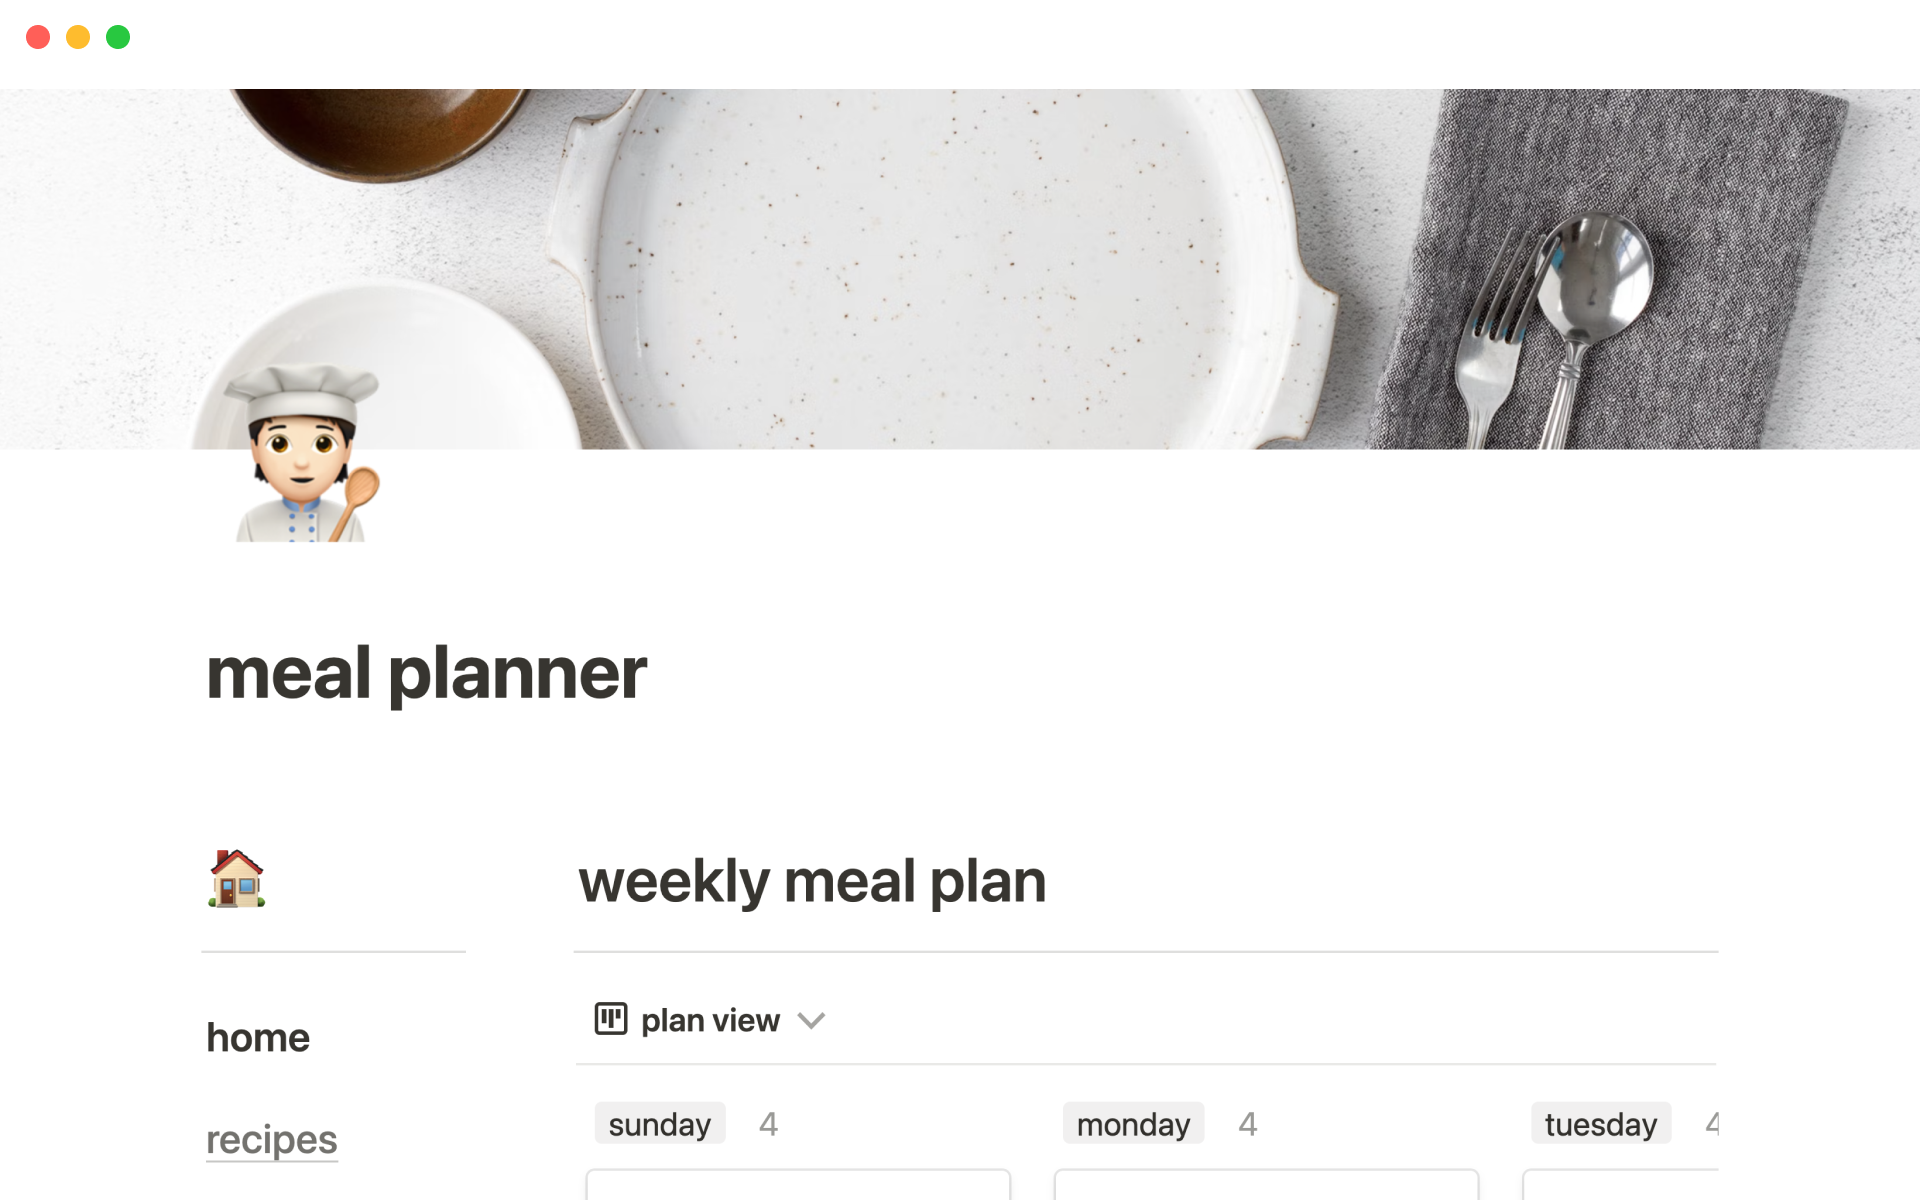 A template preview for Meal planner